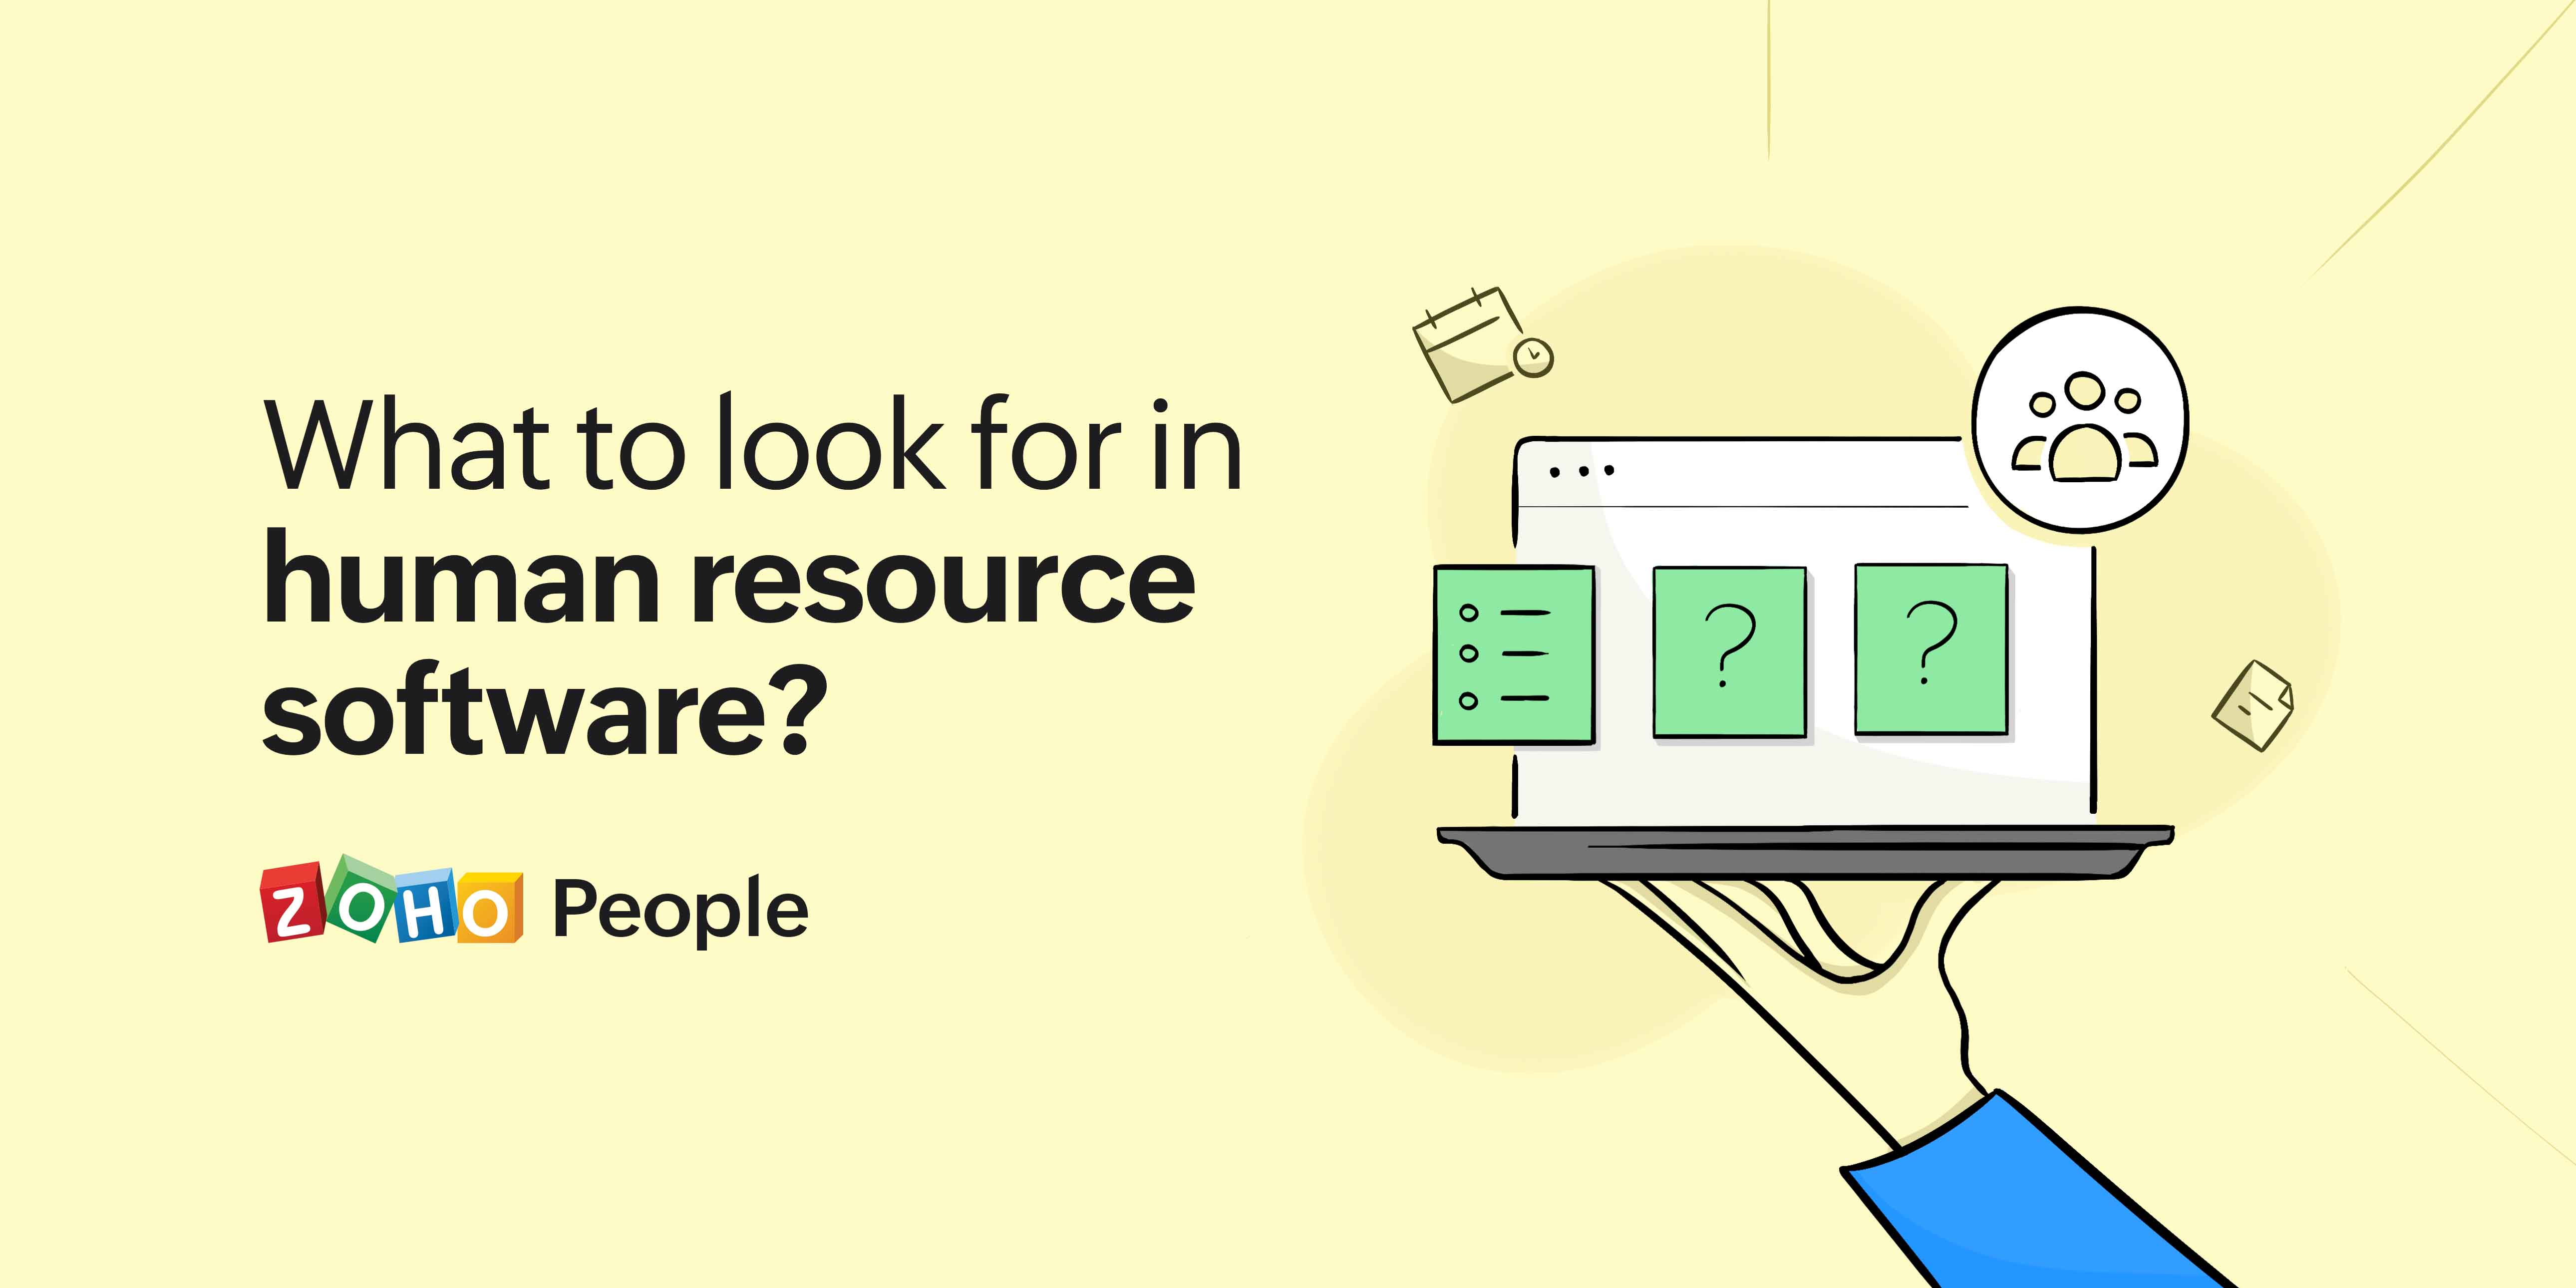 Top 6 features that make human resources software useful